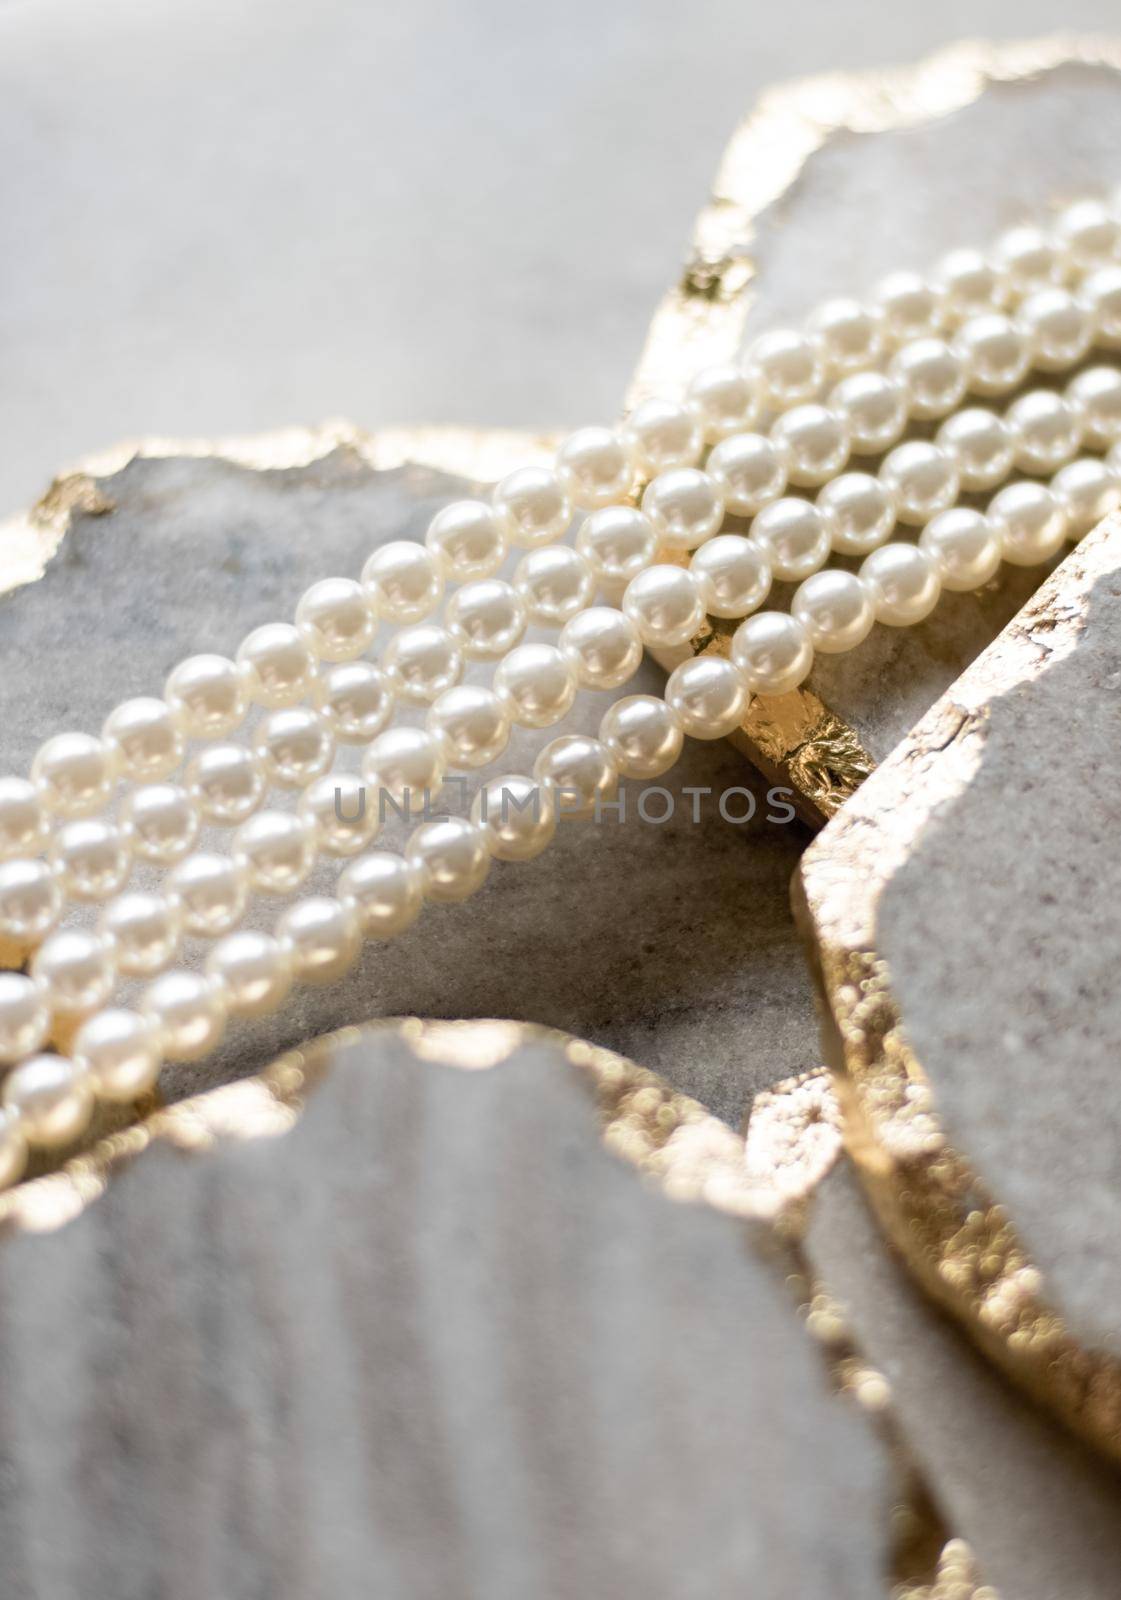 Pearl necklace on golden marble, ethical jewellery - luxury background, jewelry as a gift concept. Pearls are girl's best friends